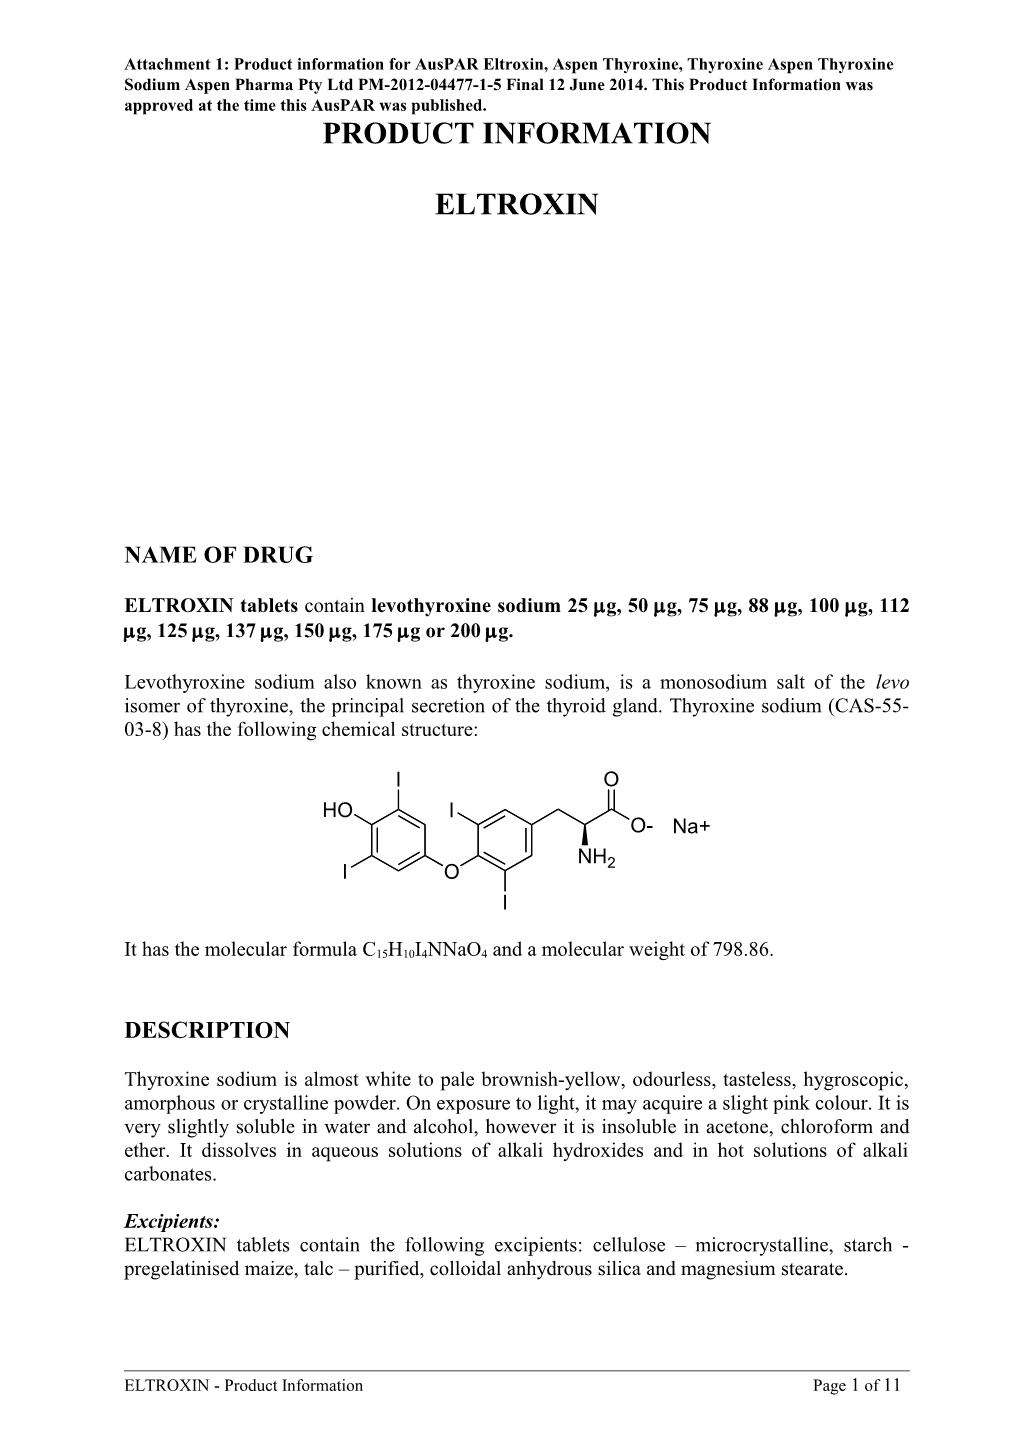 Attachment 1. Product Information for Thyroxine Sodium